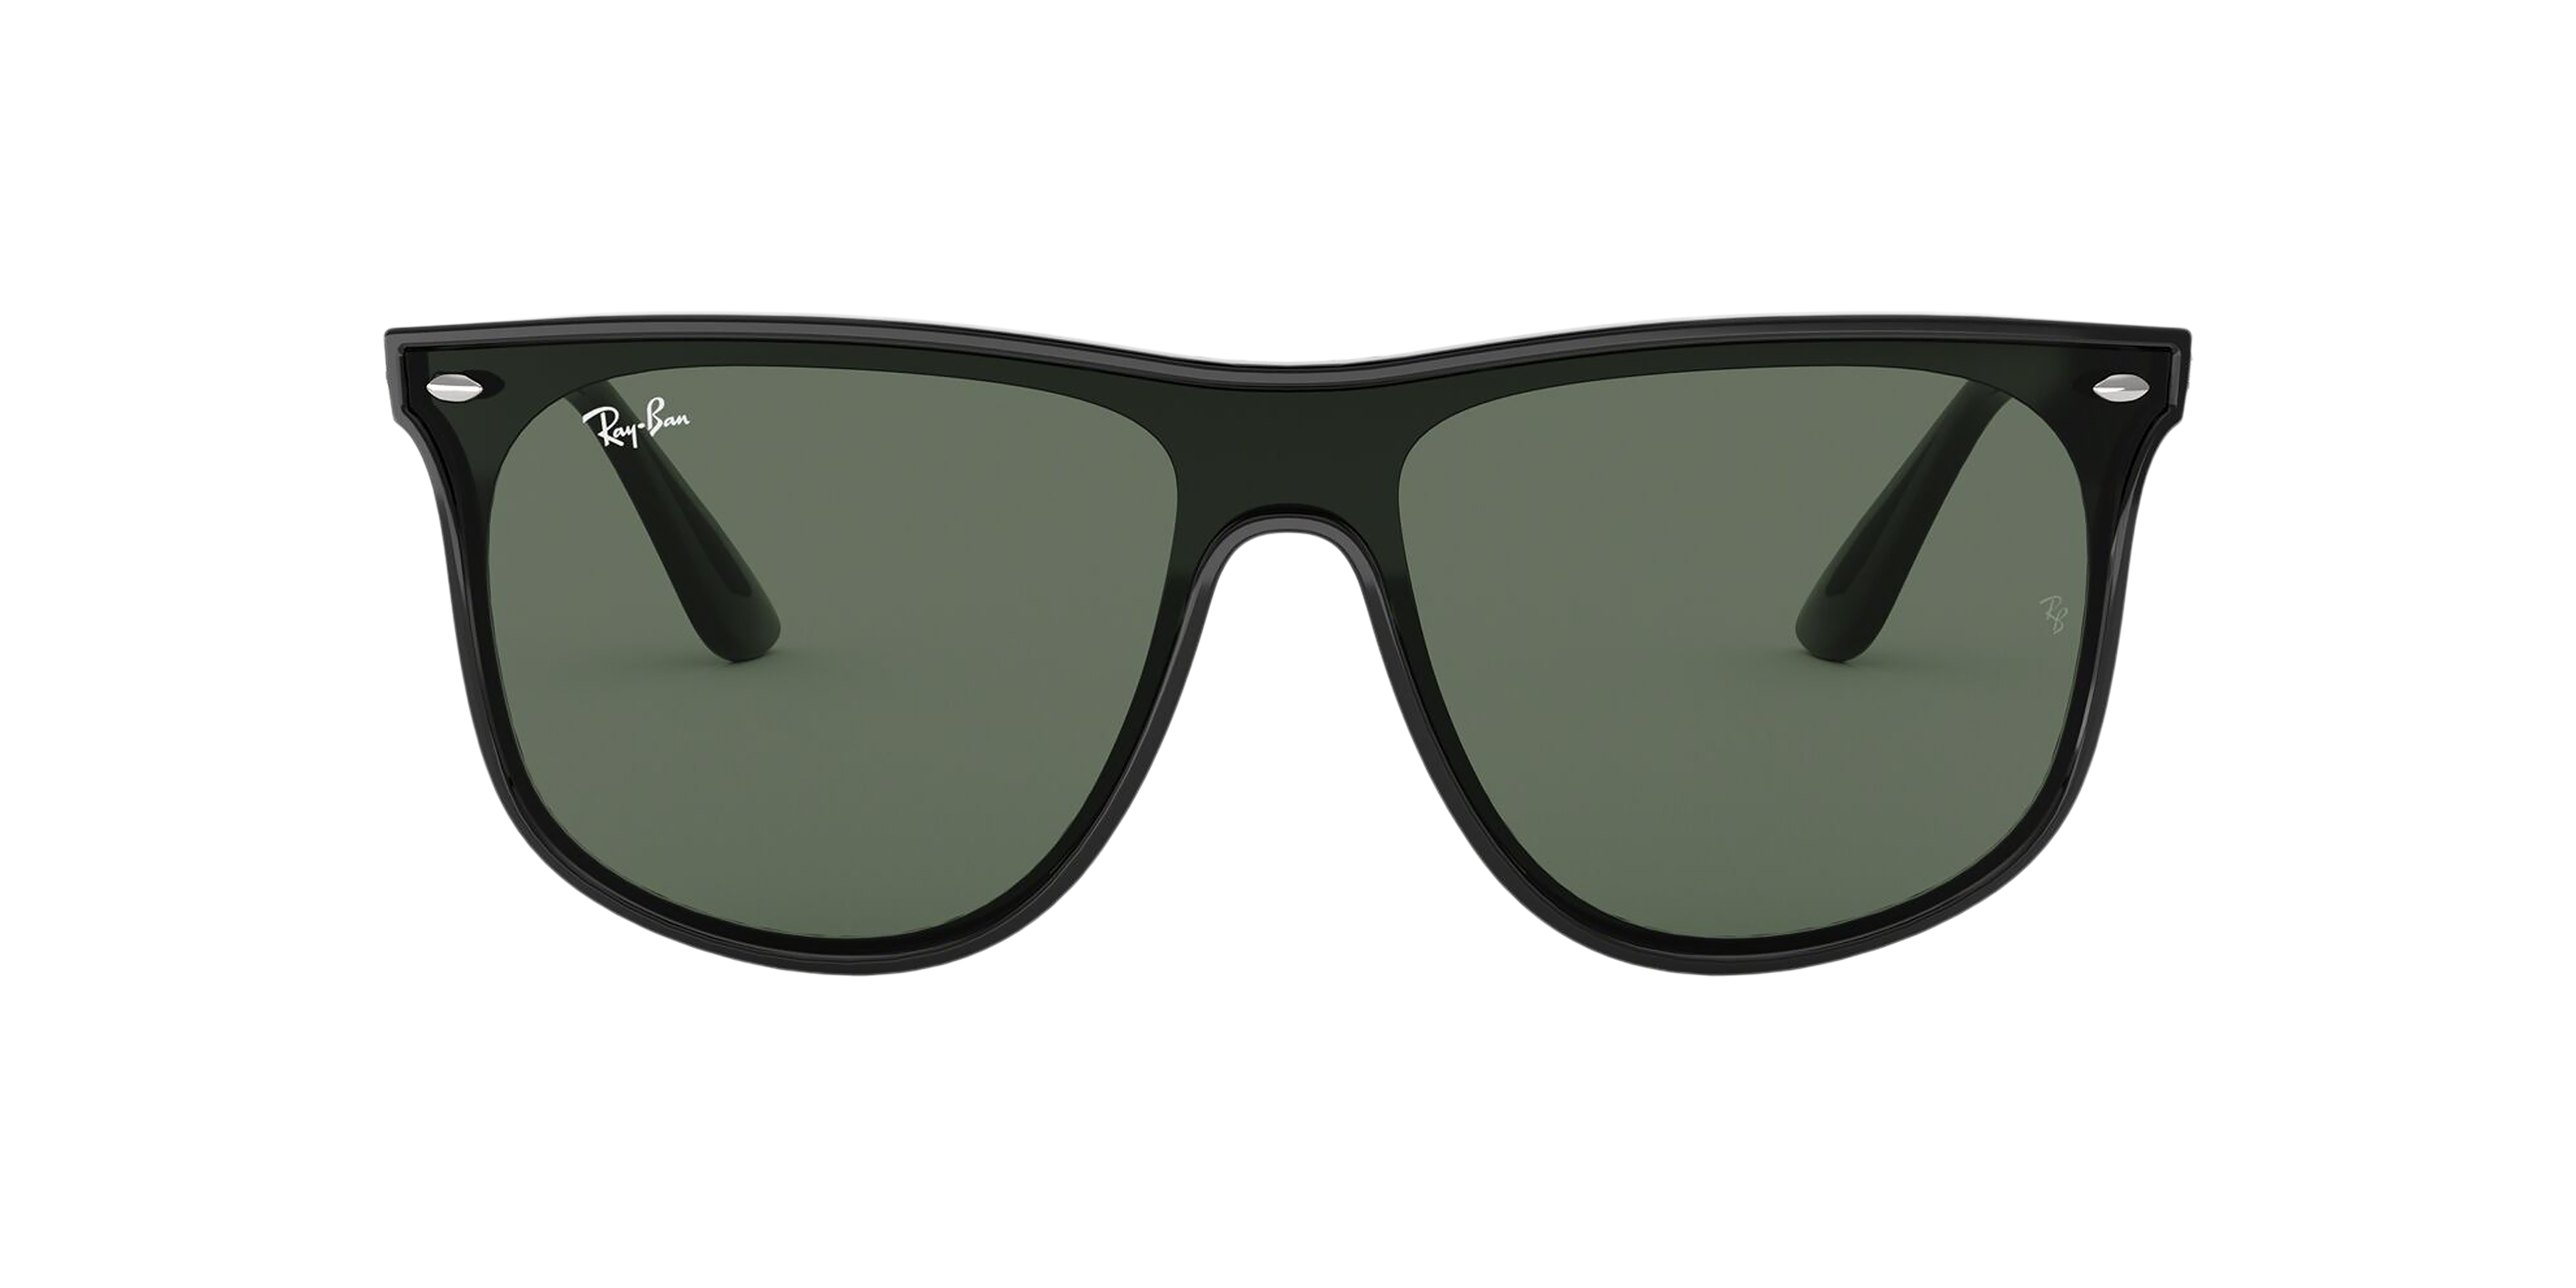 [products.image.front] Ray-Ban Blaze RB4447N 601/71